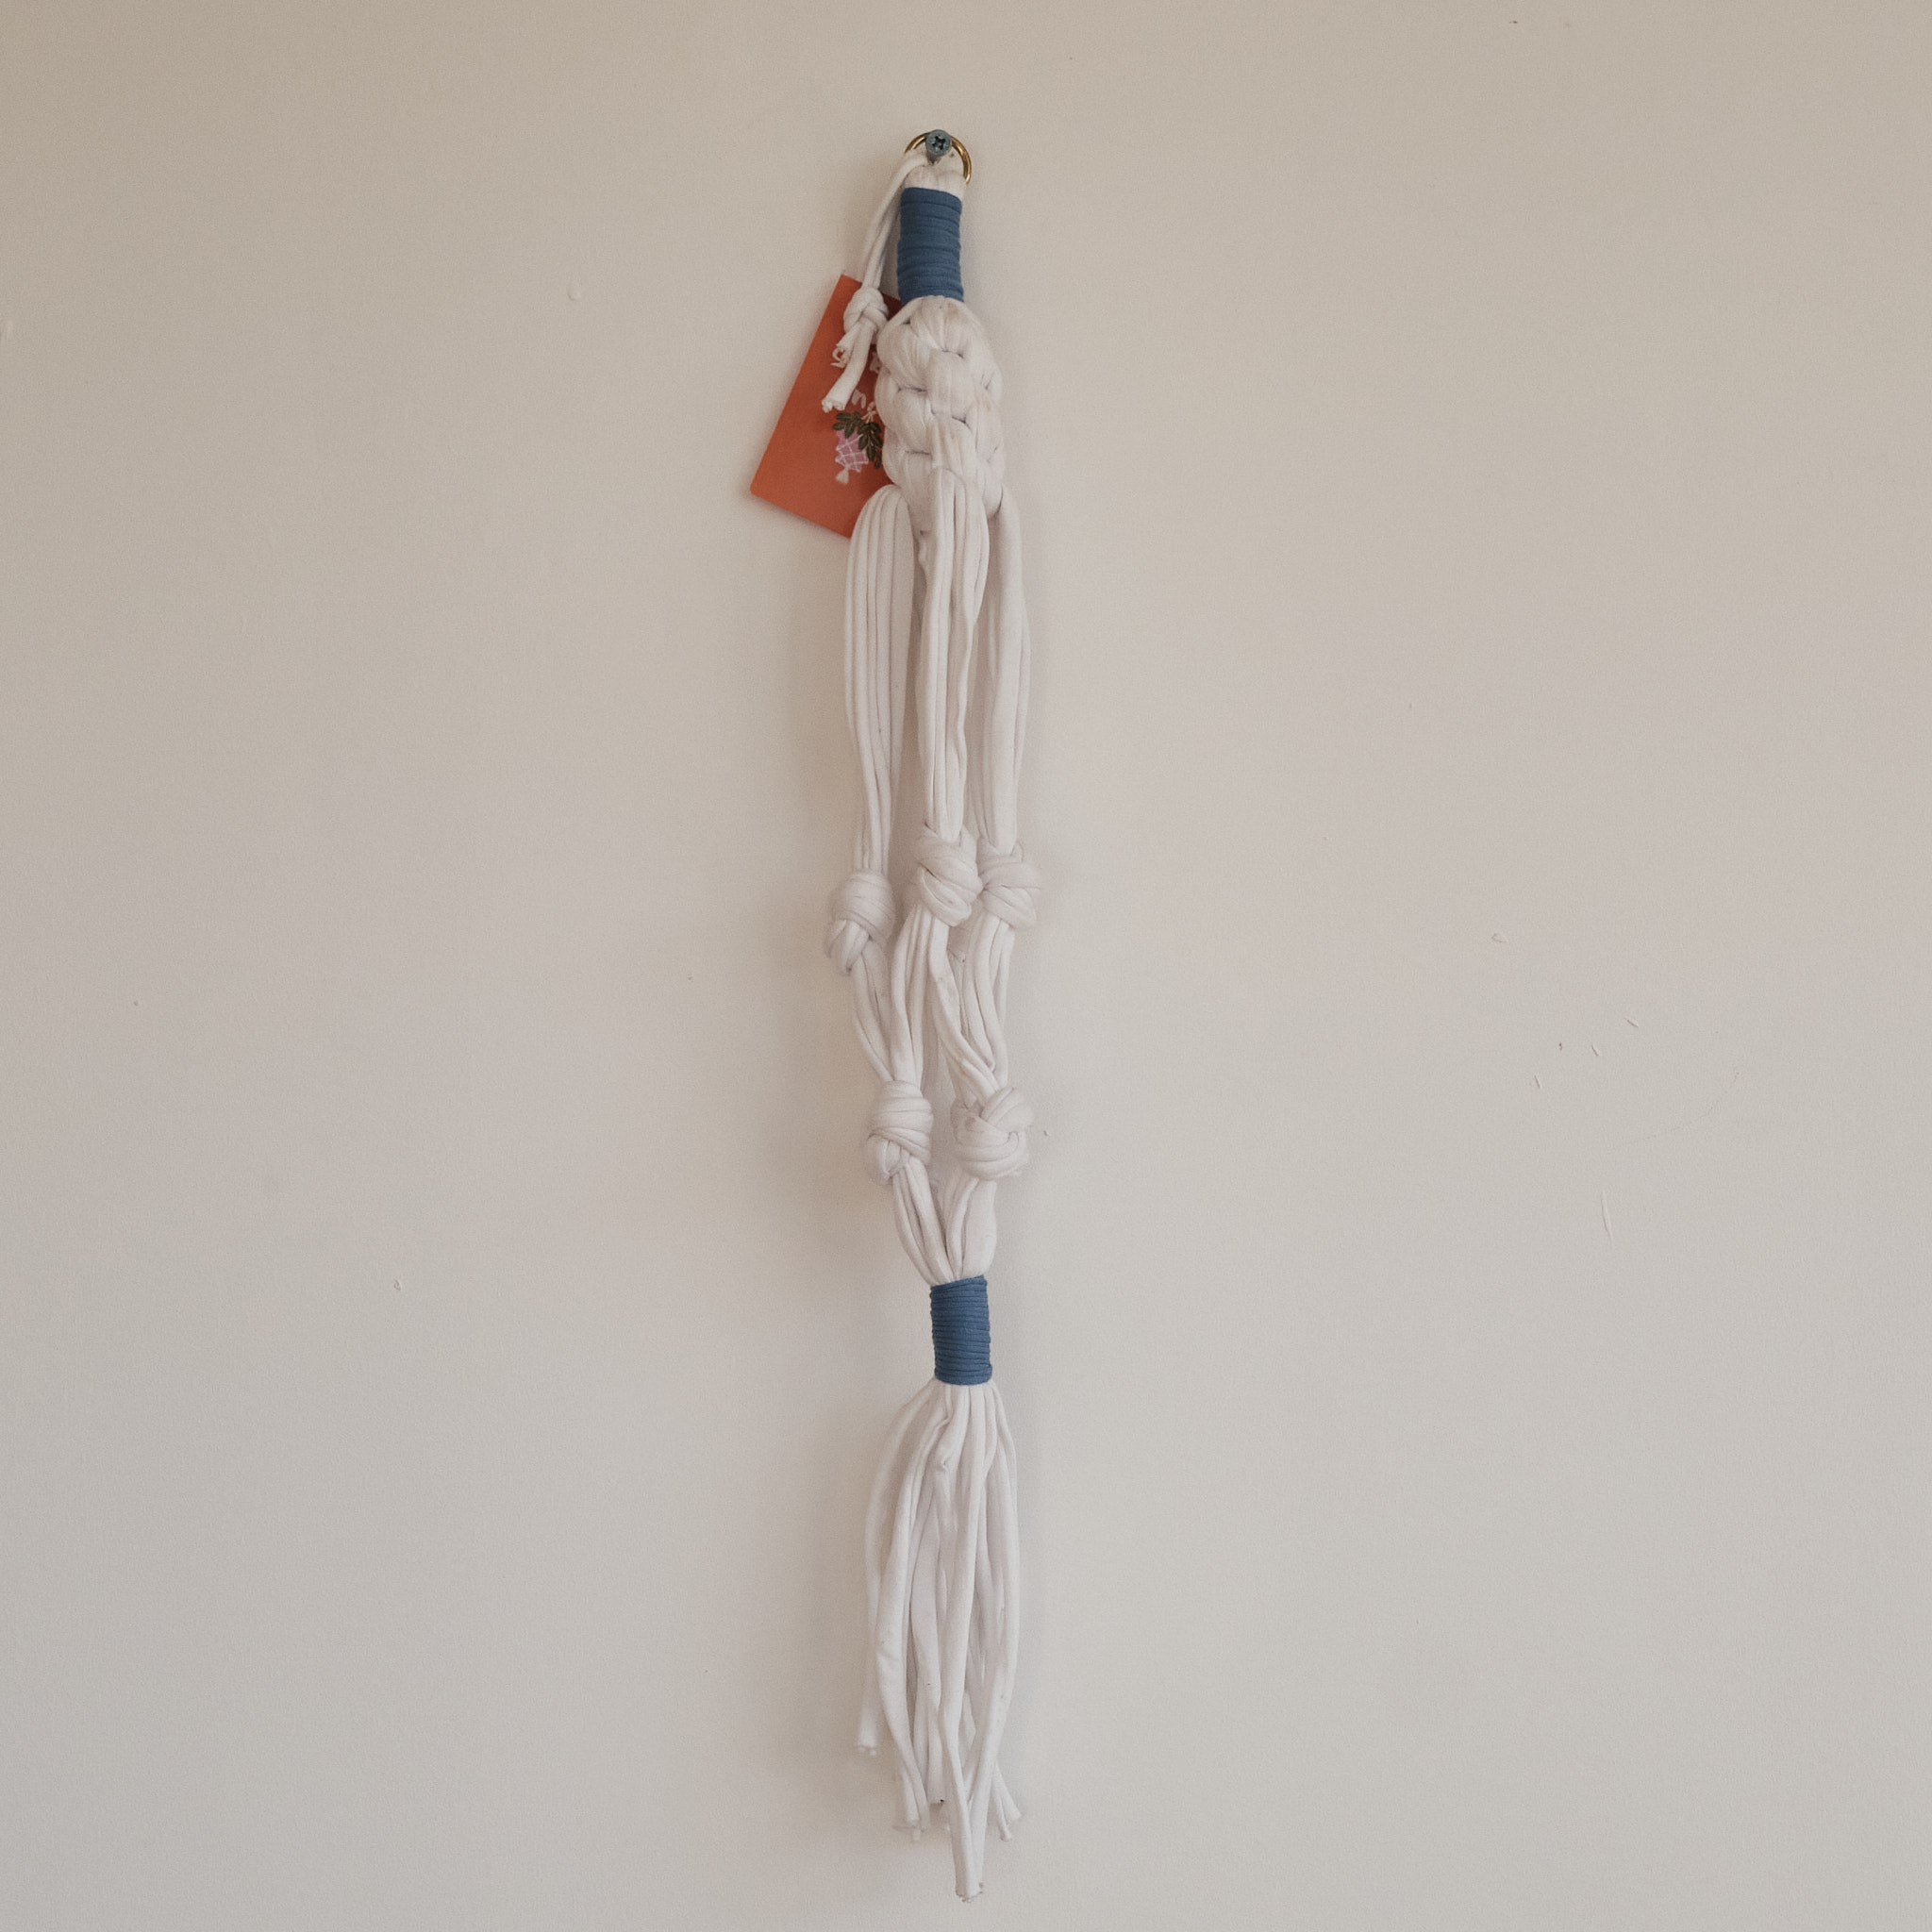 Sarora Knots Recycled Cotton Plant Hanger - Long in White & Blue